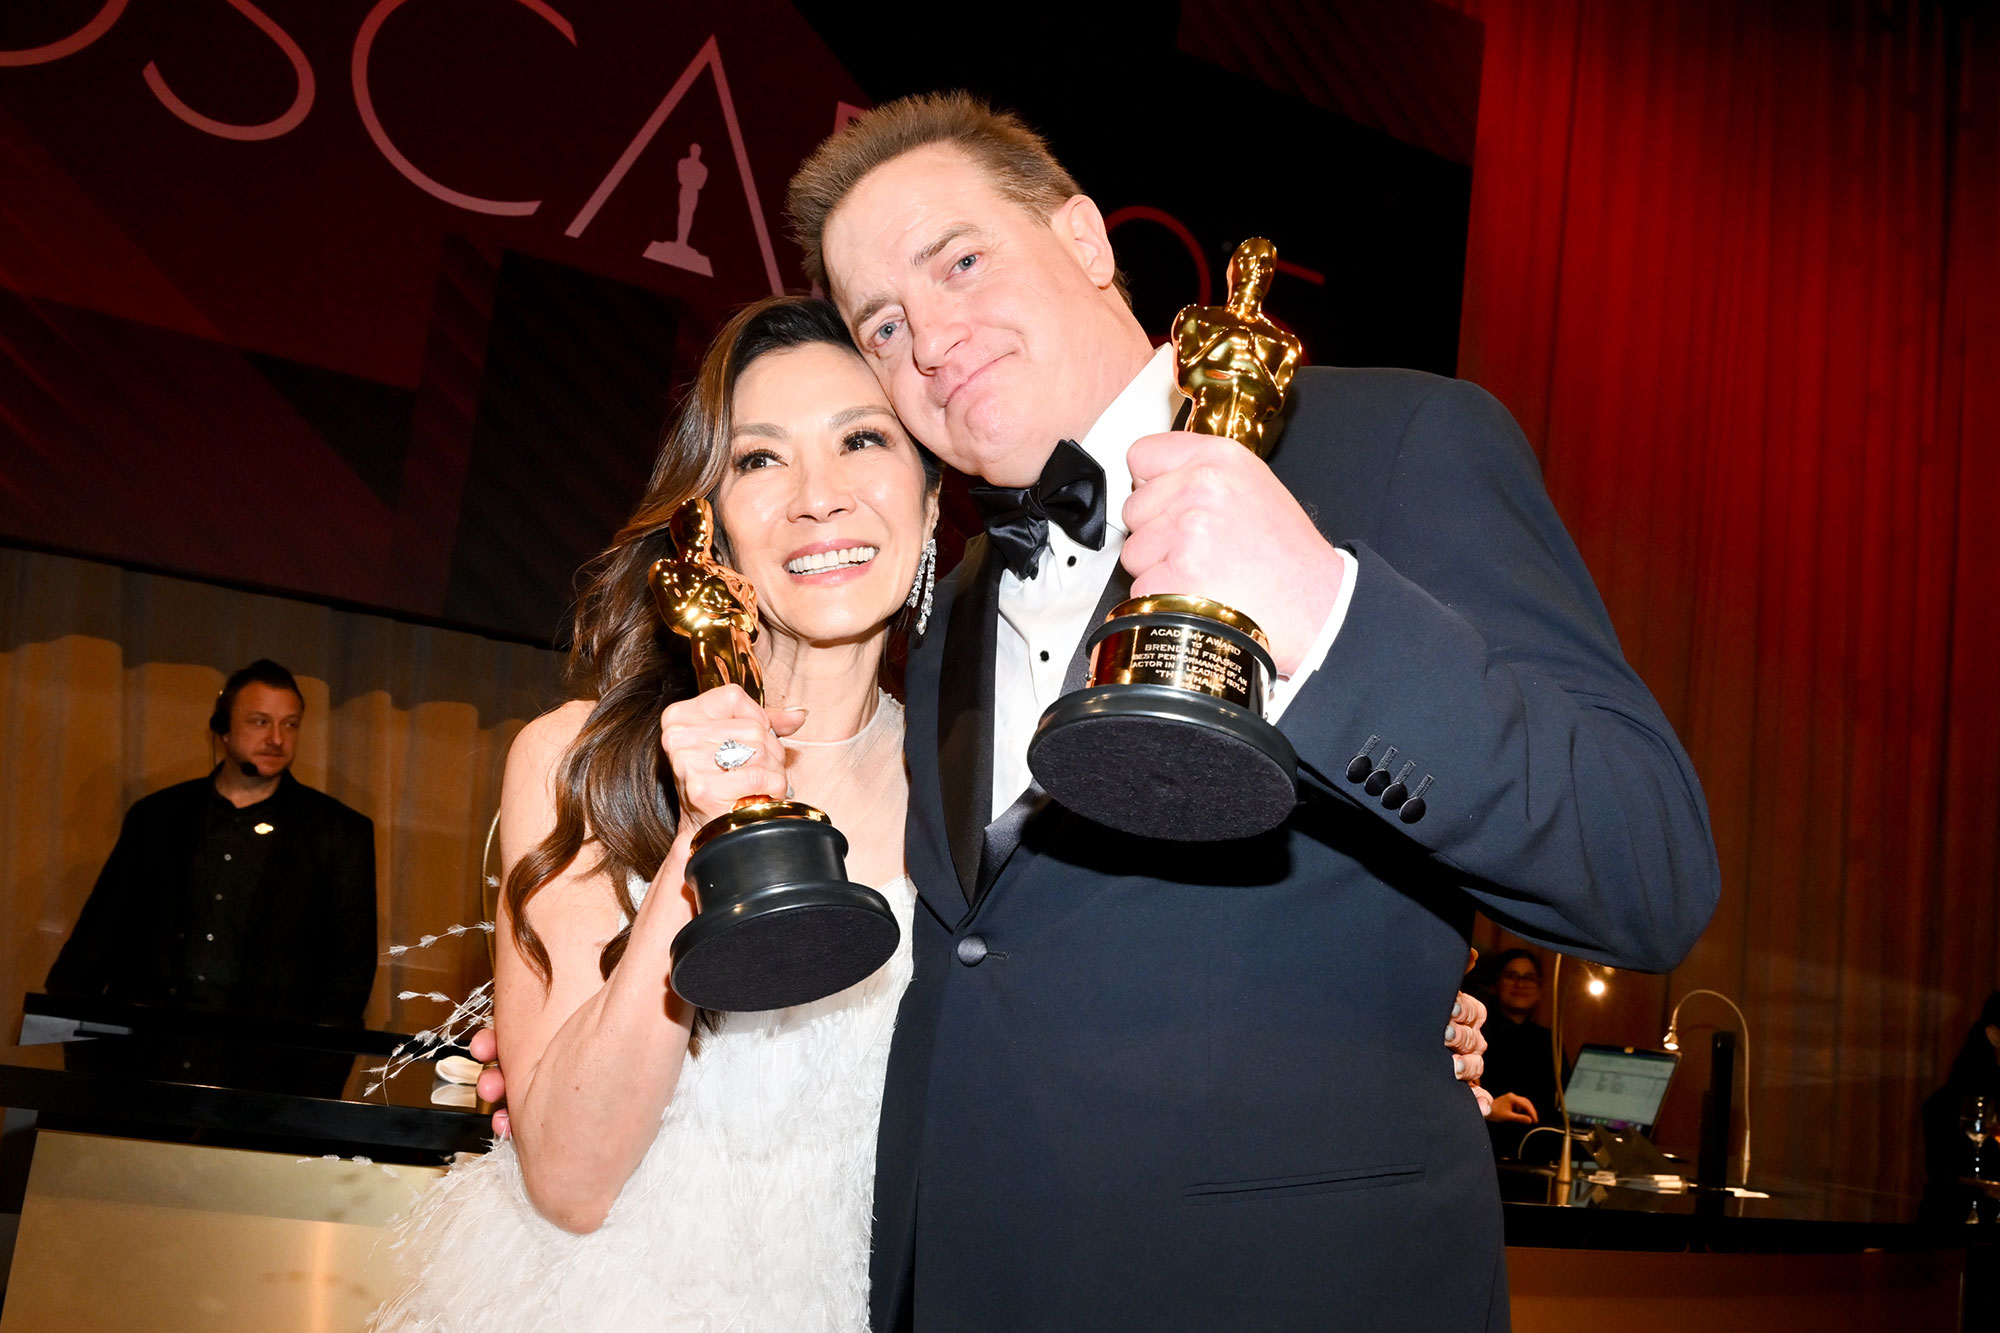 Michelle Yeoh, winner of the Best Actress in a Leading Role award for "Everything Everywhere All At Once," and Brendan Fraser, winner of the Best Actor in a Leading Role award for "The Whale", at the 95th Annual Academy Awards Governors Ball held at Dolby Theatre on March 12, 2023 in Los Angeles, California.